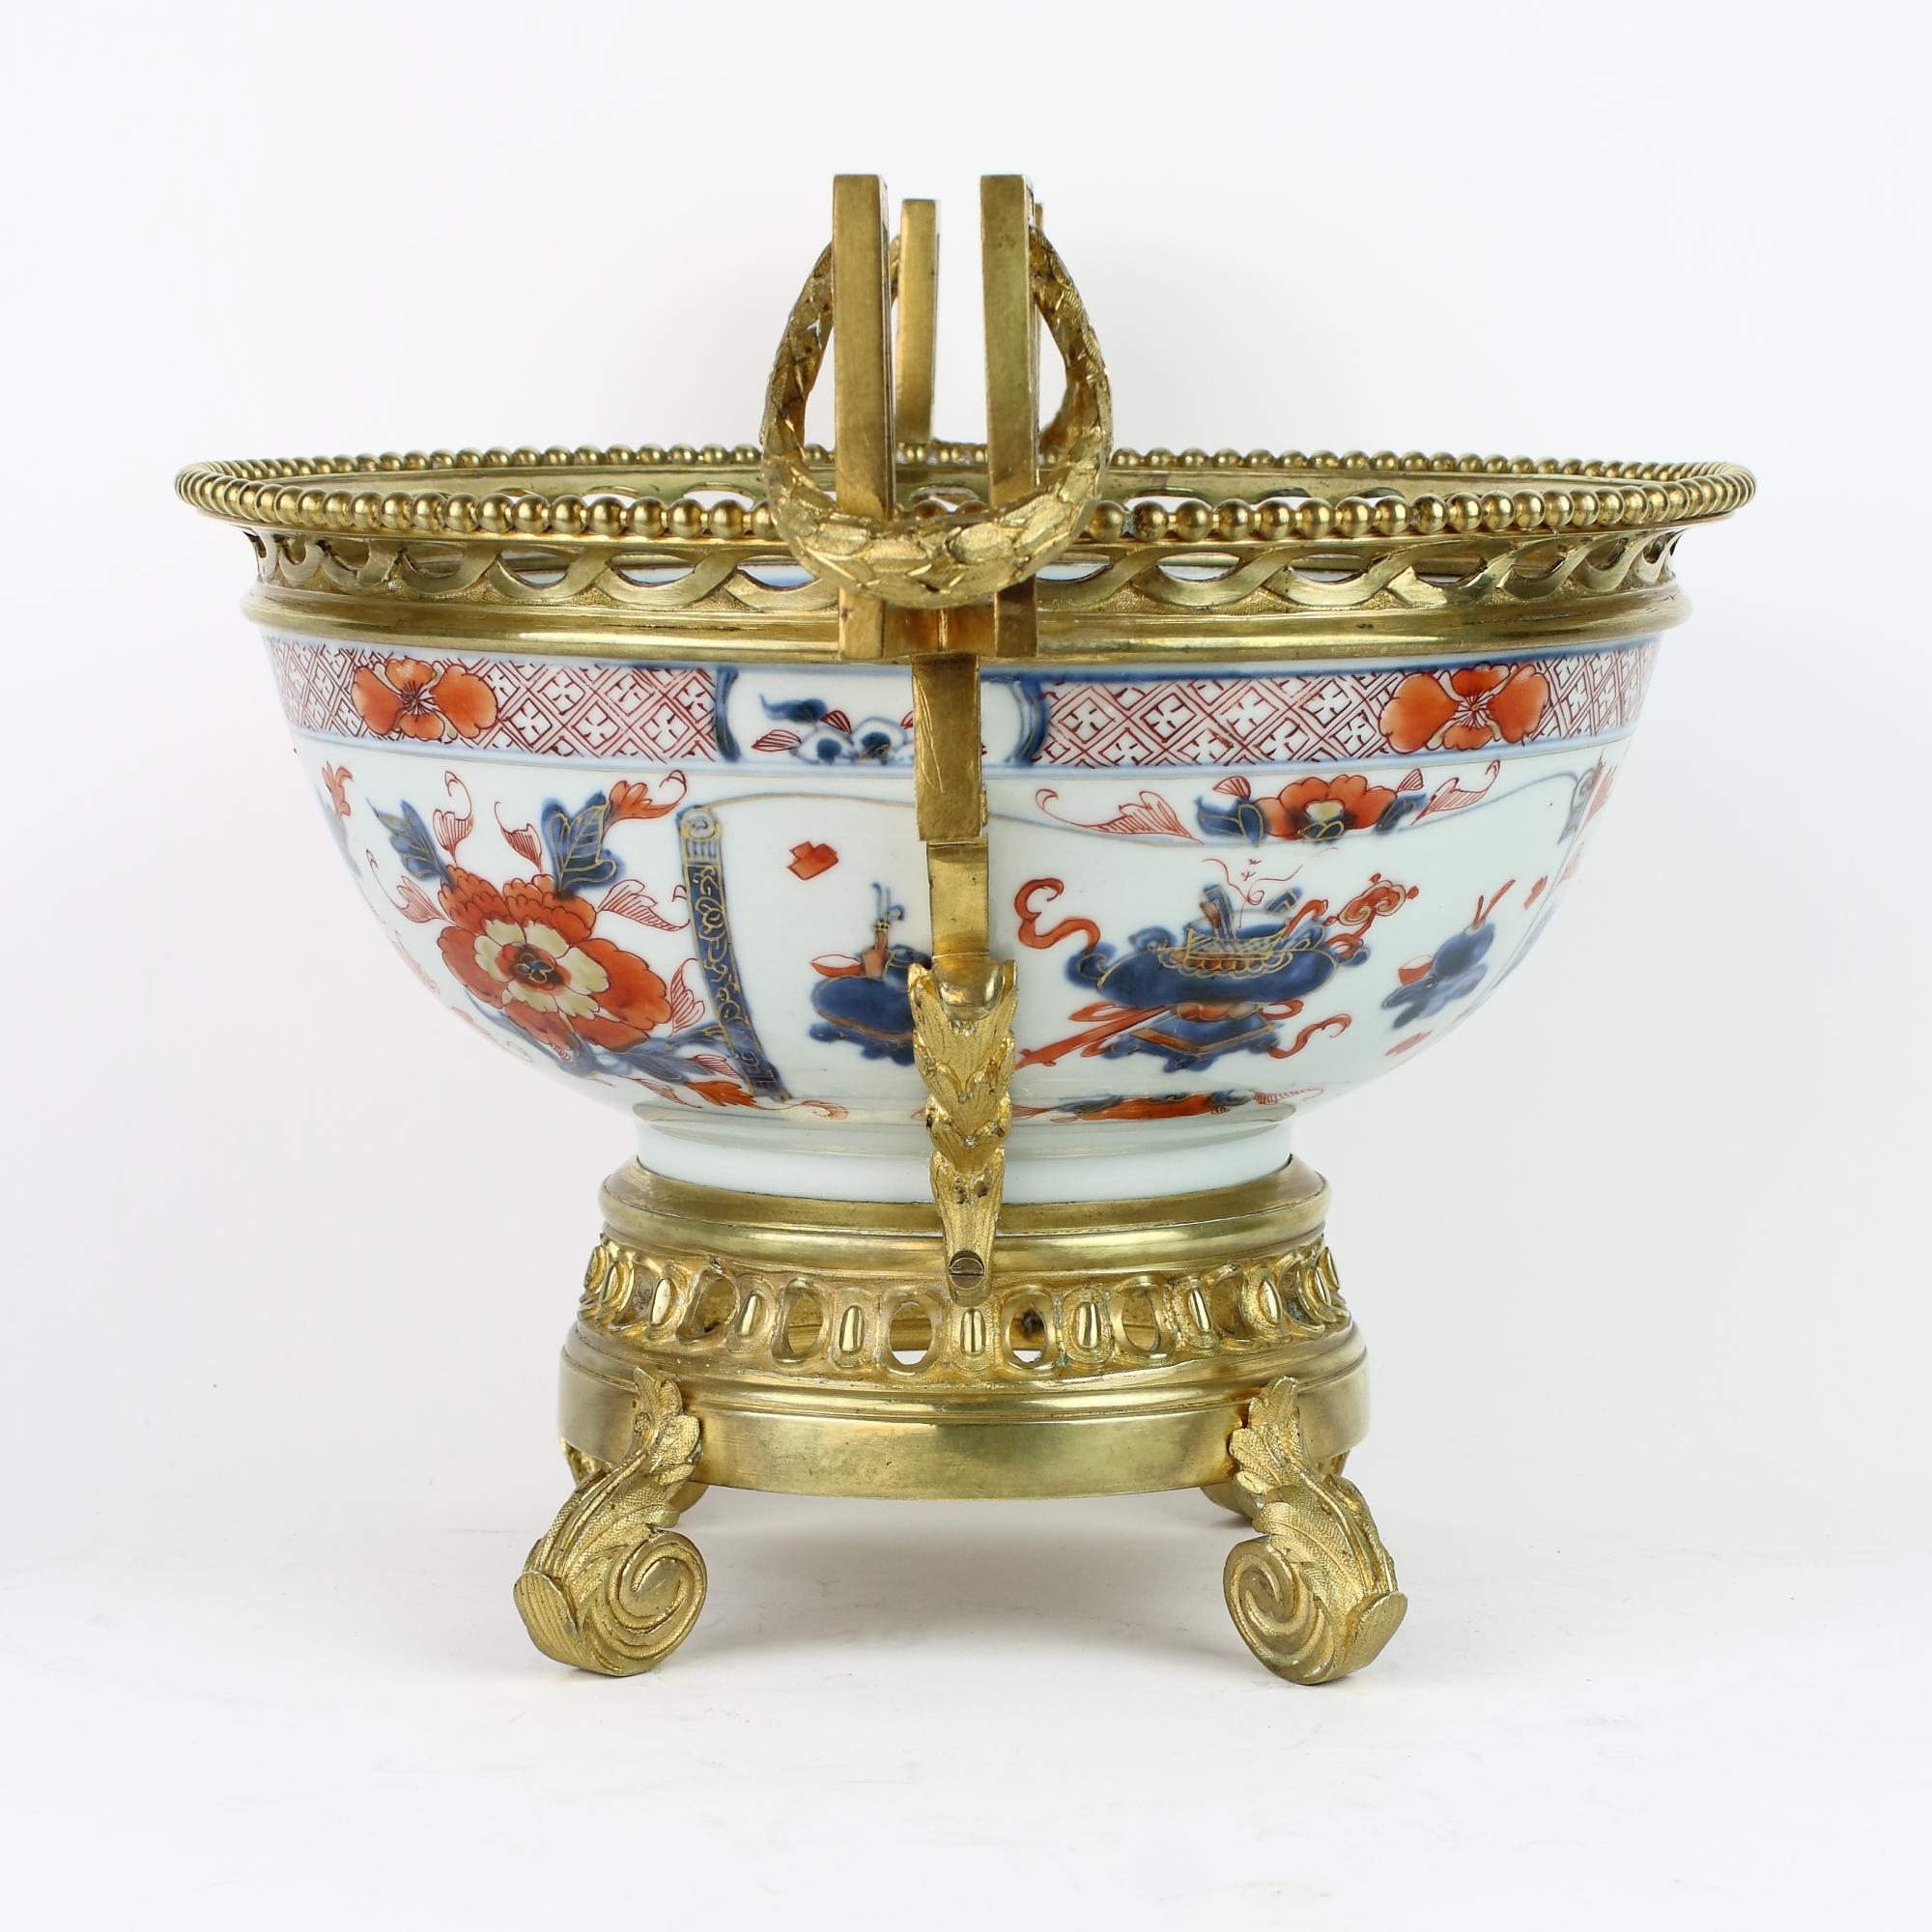 Excellent 19th century French Louis XVI decorative Imari Porcelain gilt bronze mount bowl

A 19th century Chinese blue and red Imari ware bowl mounted on a round Louis XVI style openwork base with four neoclassical scroll feet, the Imari bowl